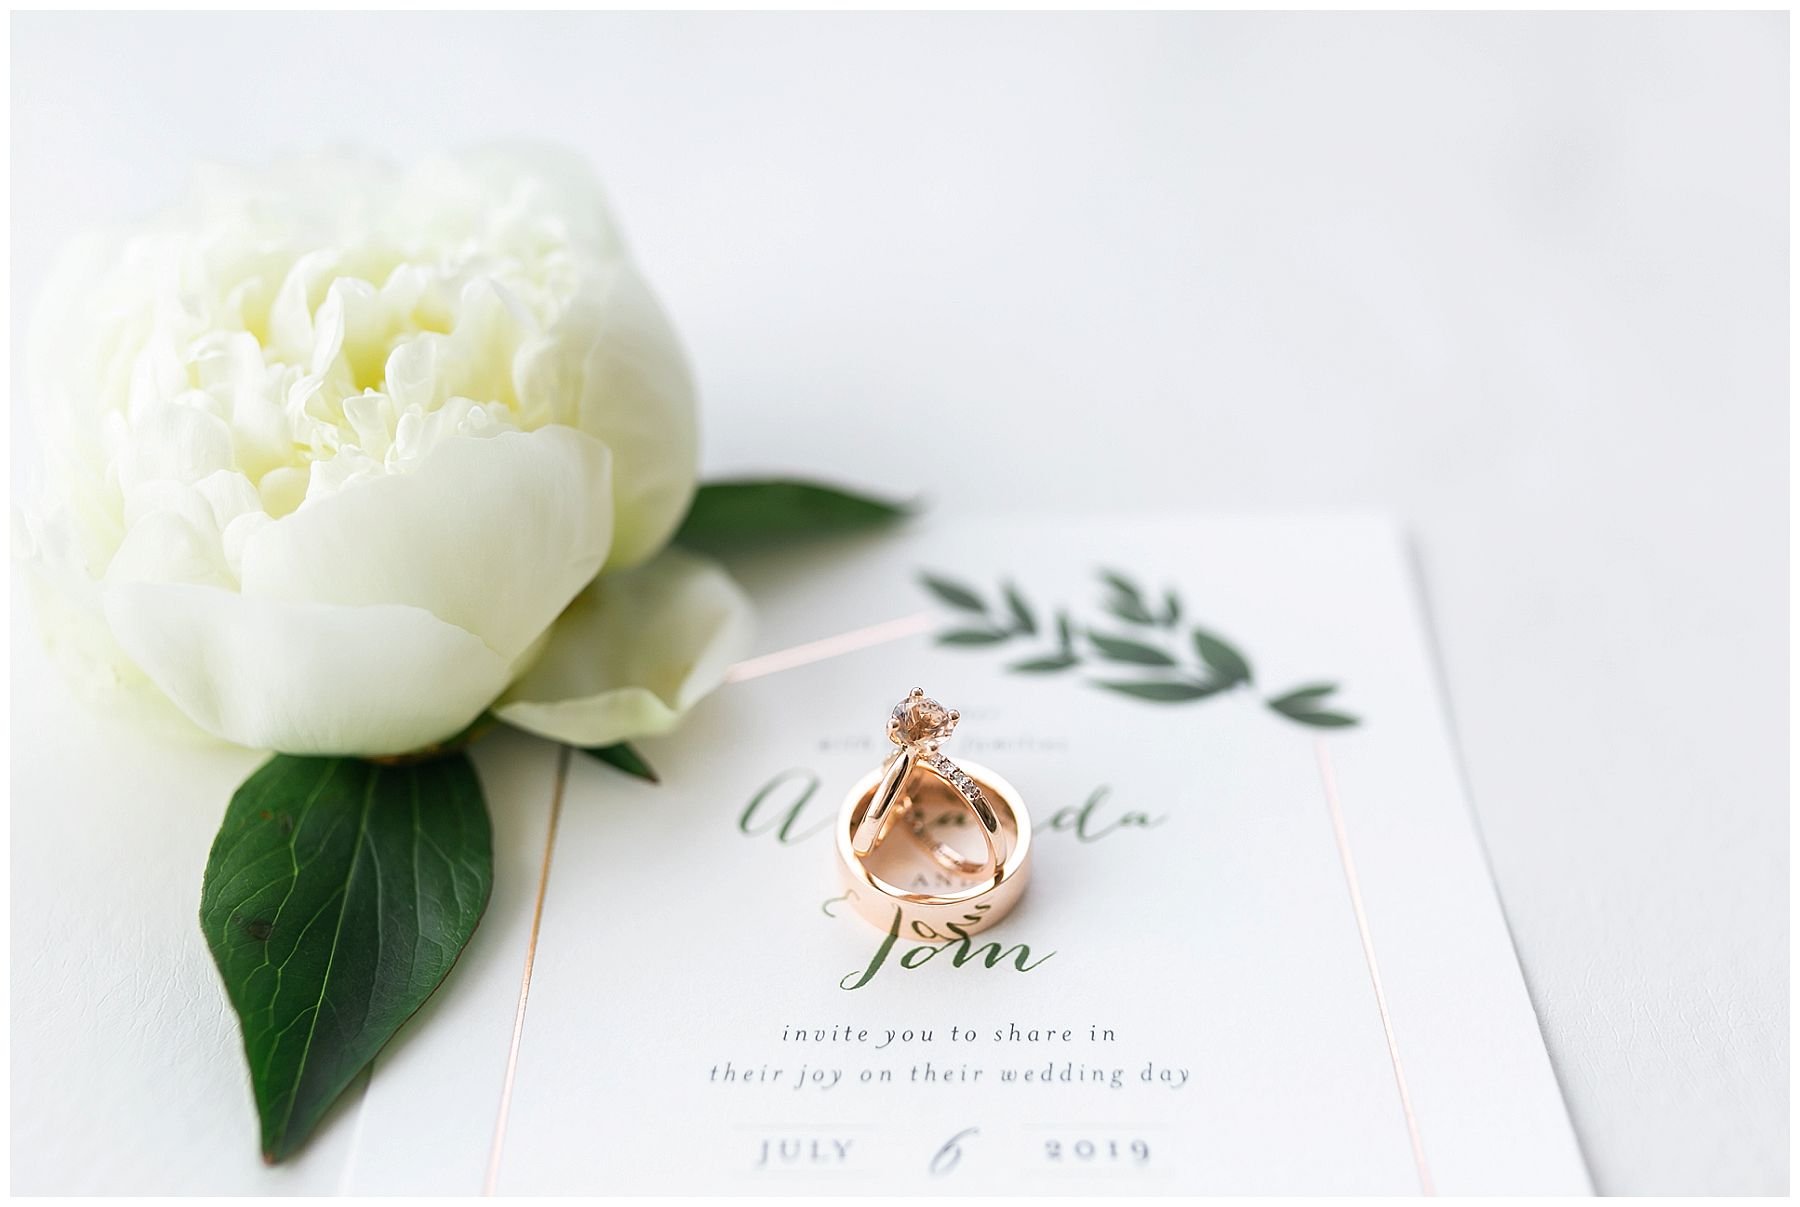 Bride's rose gold wedding rings on invitation suite with white peony